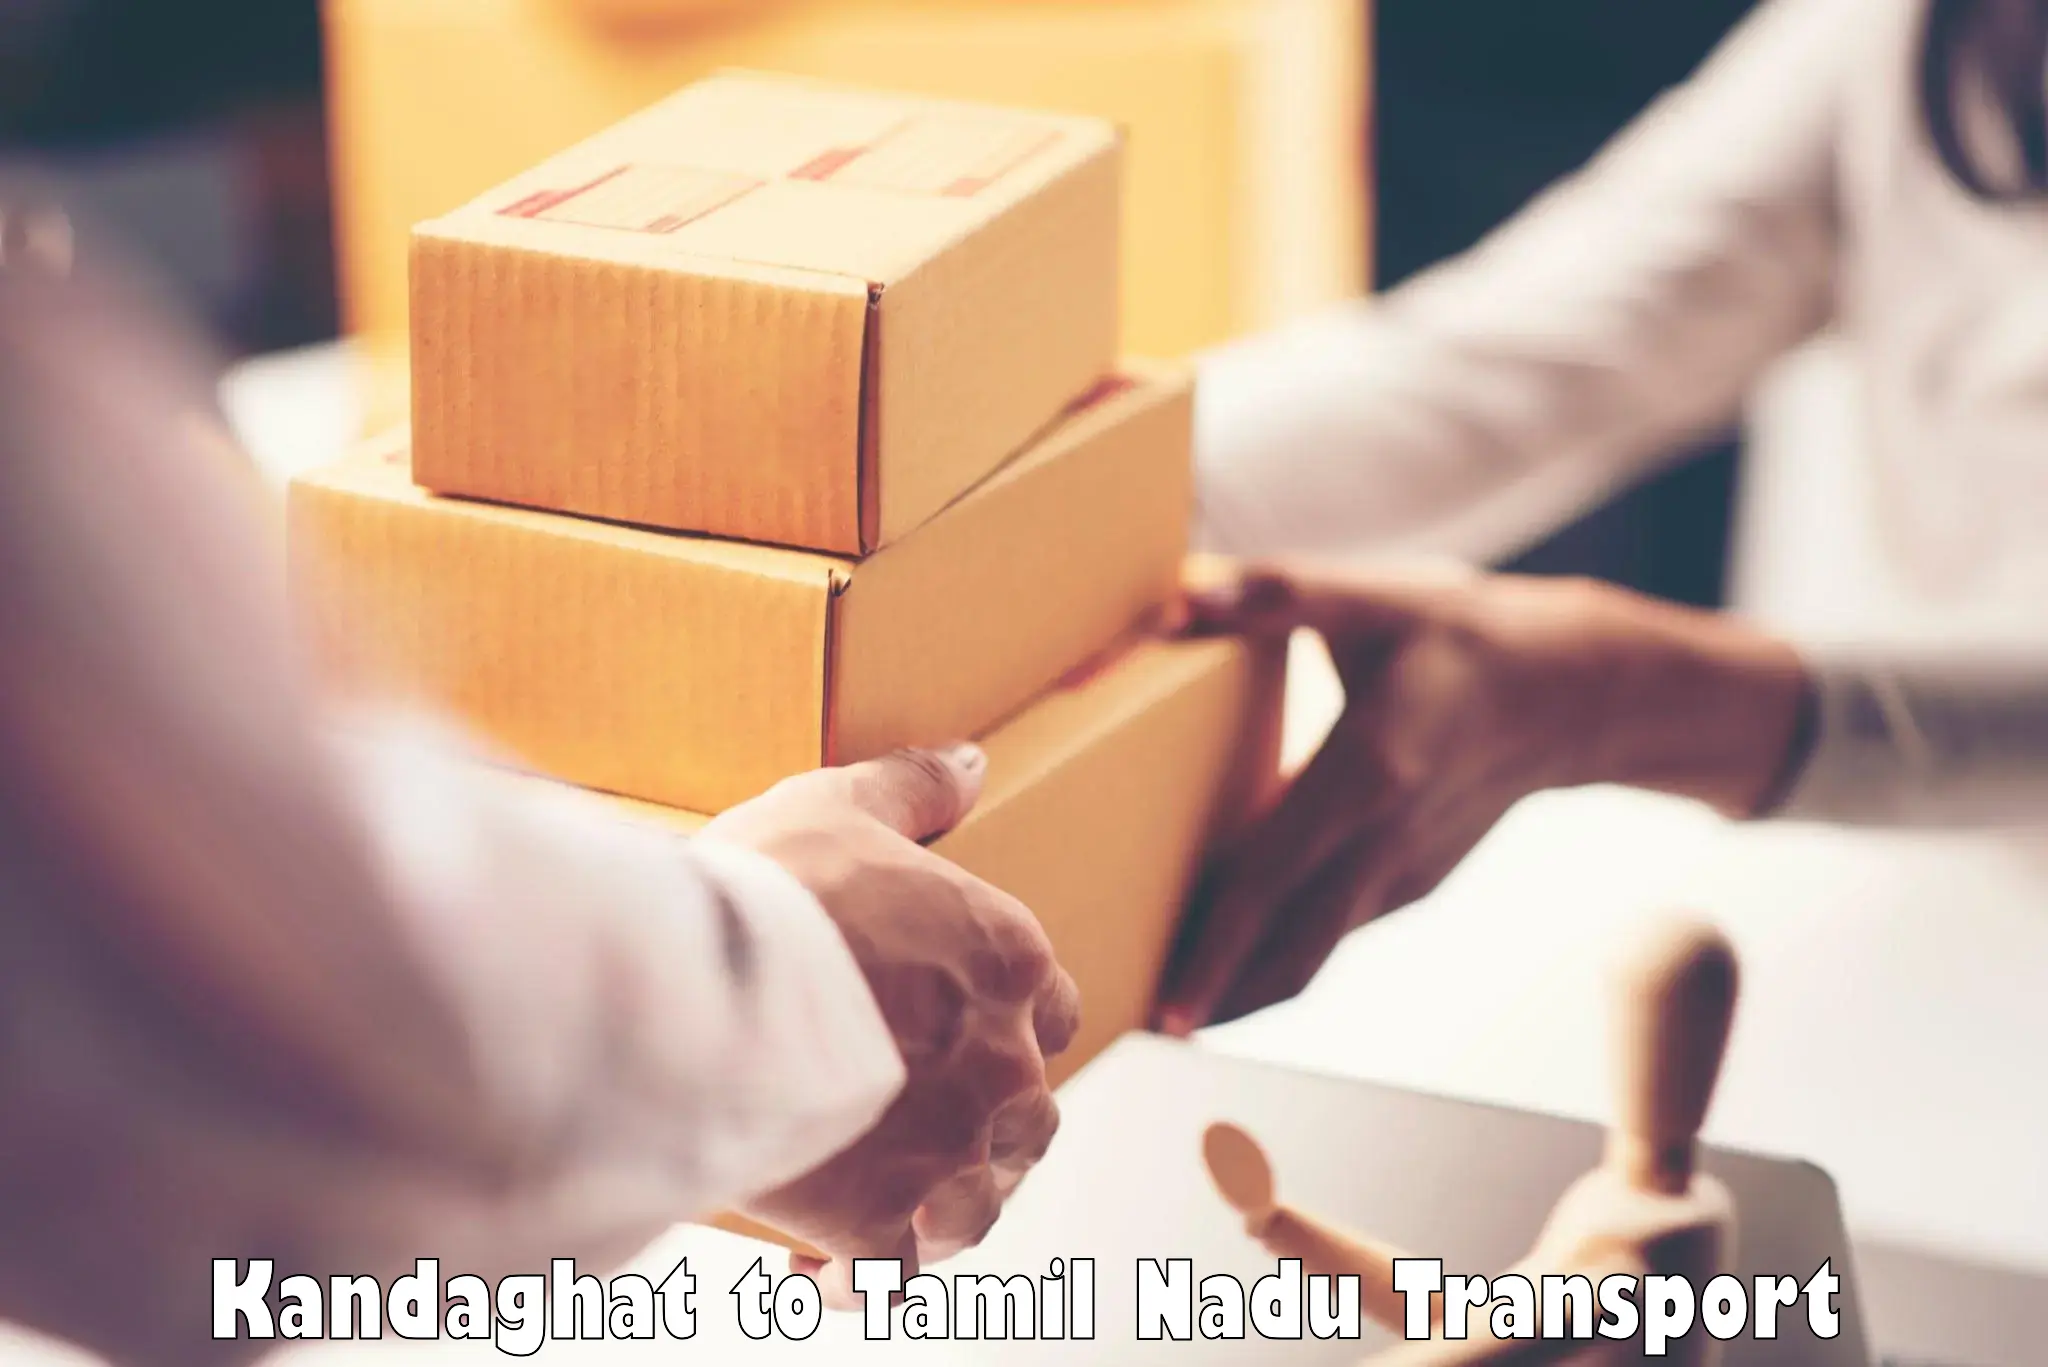 Container transport service Kandaghat to Uthangarai